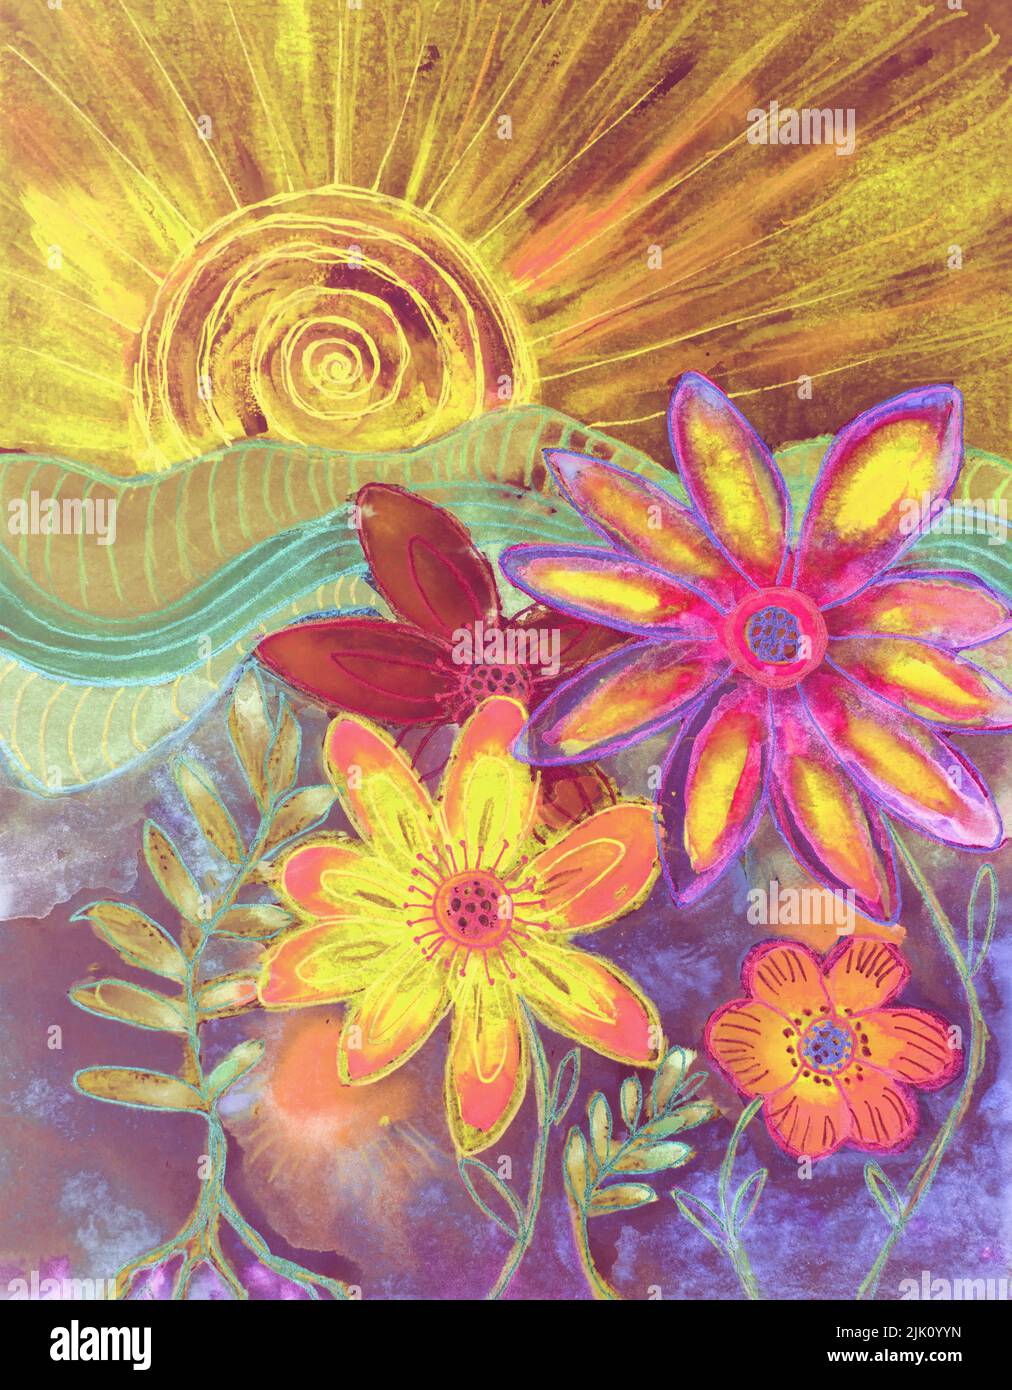 Sunrise with doodled landscape and flowers. The dabbing technique near the edges gives a soft focus effect due to the altered surface roughness of the Stock Photo